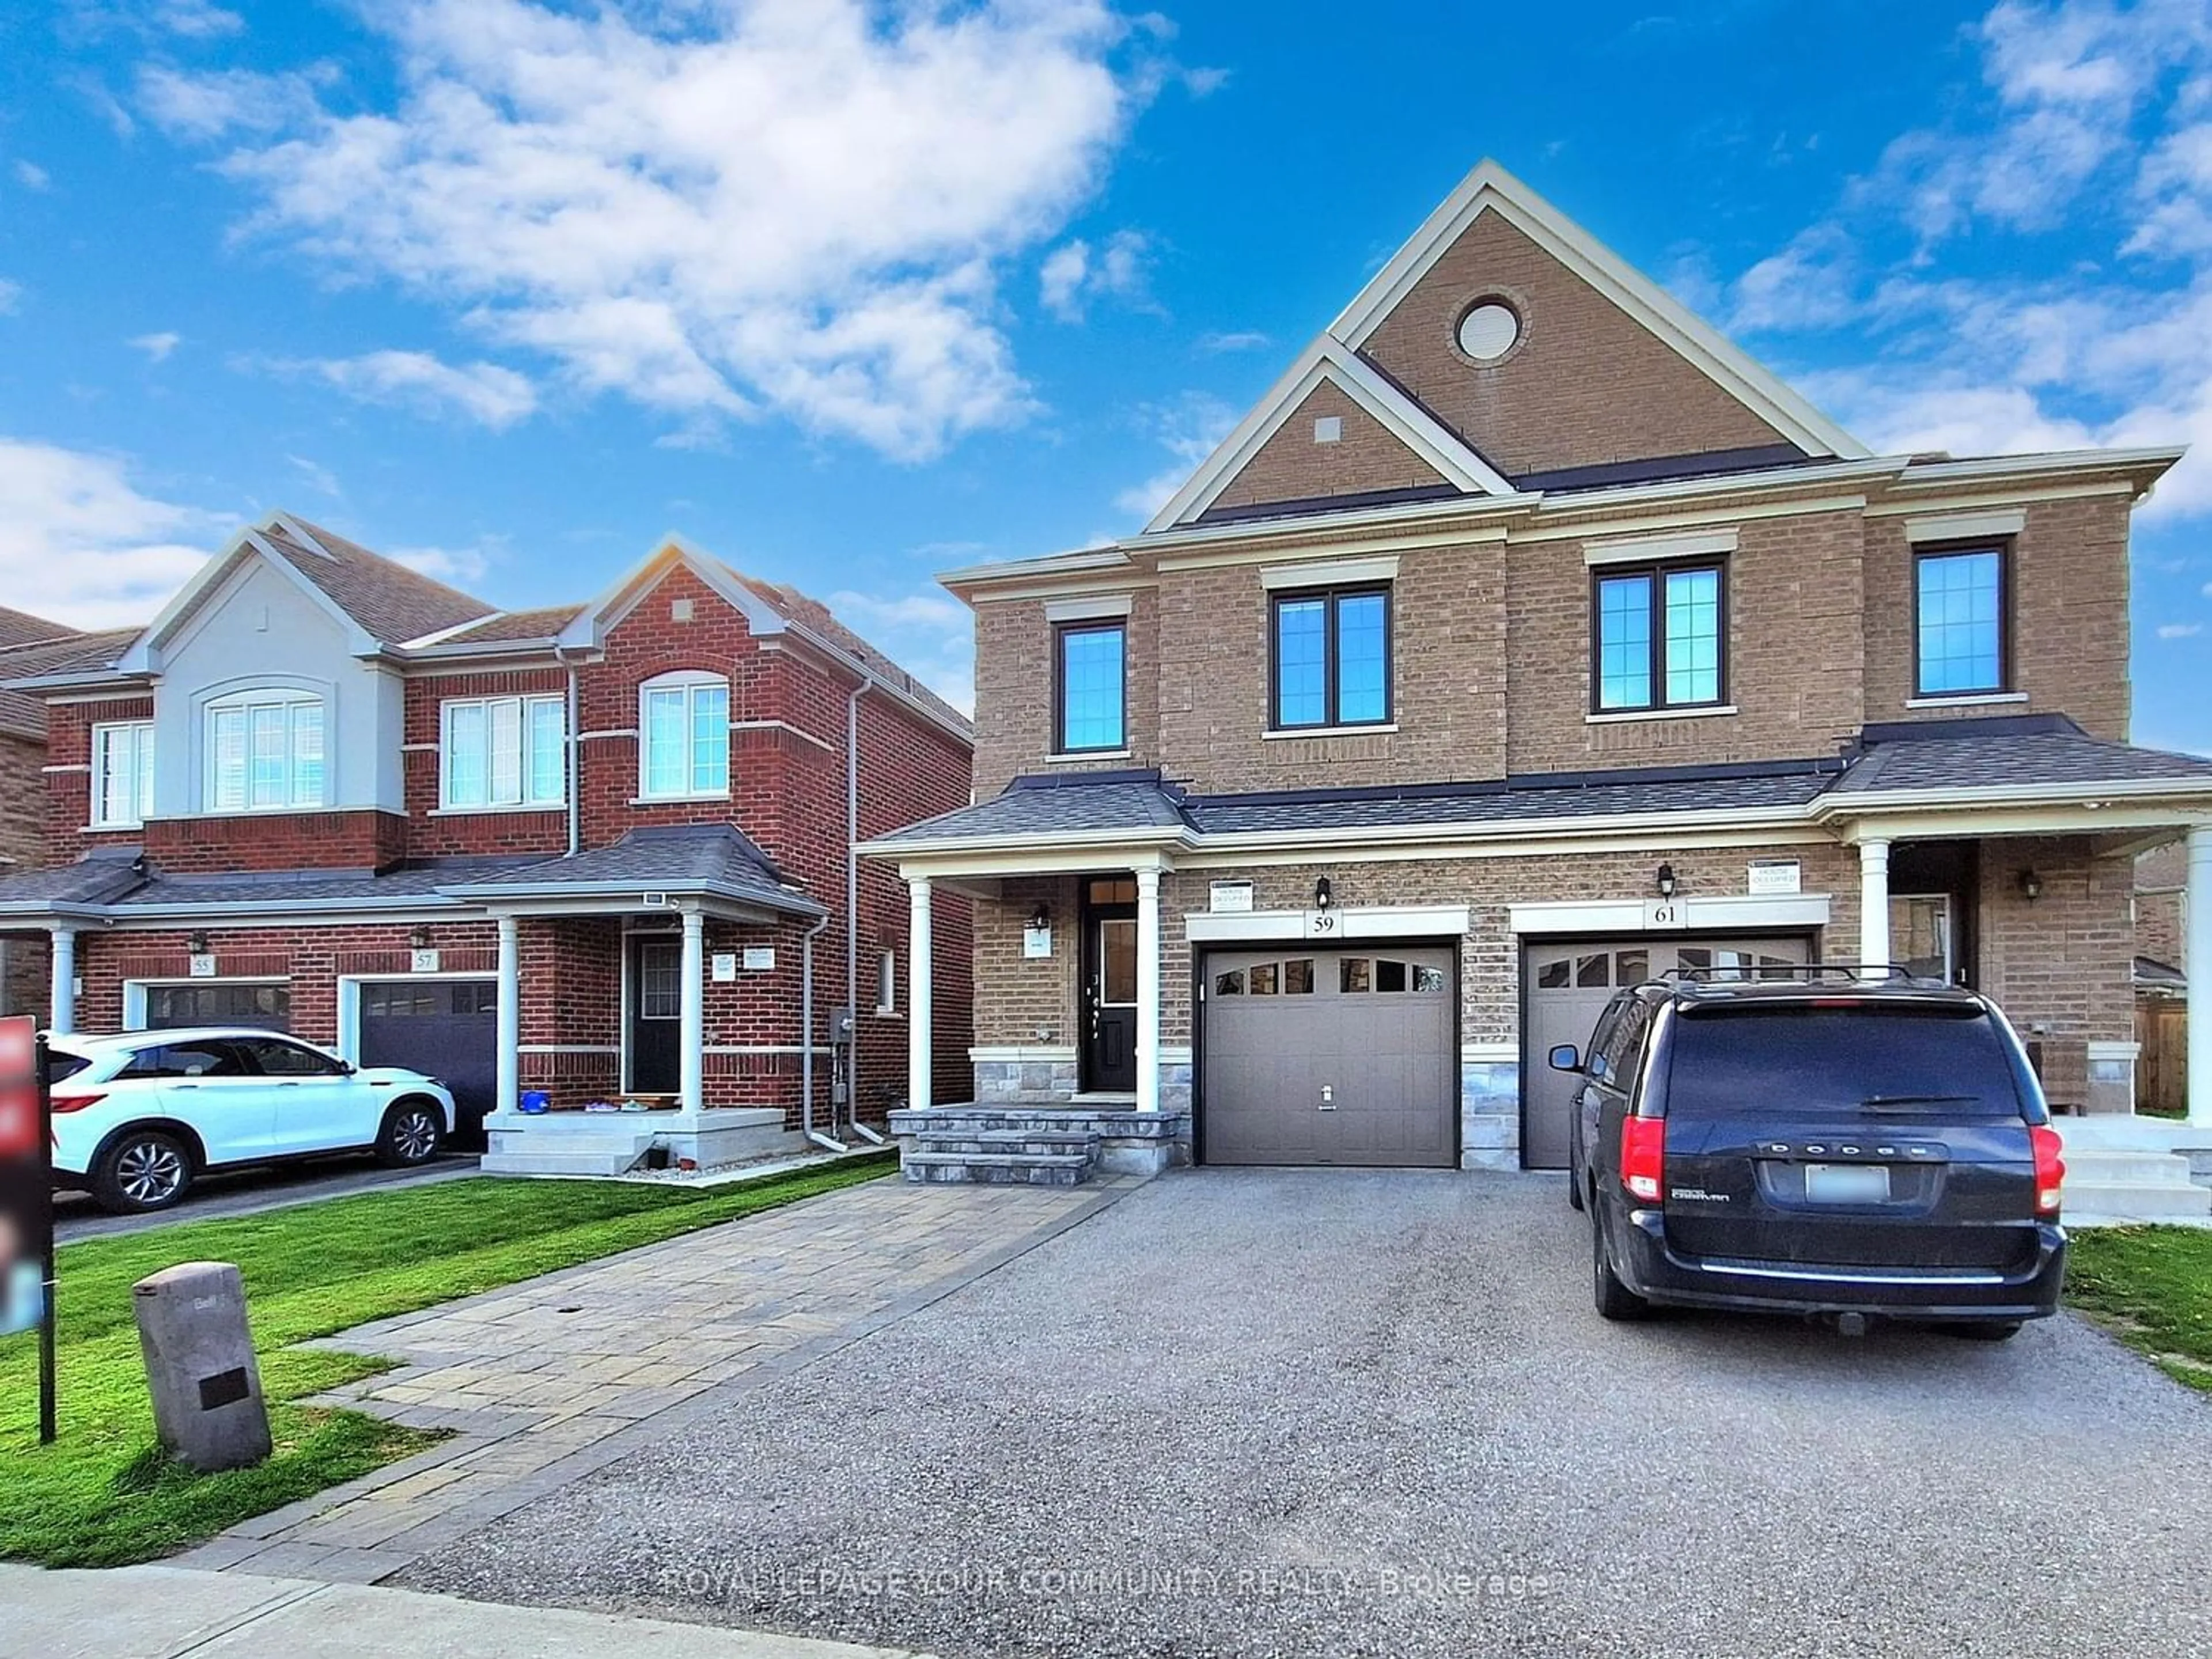 Home with brick exterior material for 59 Sharonview Cres, East Gwillimbury Ontario L9N 0L6